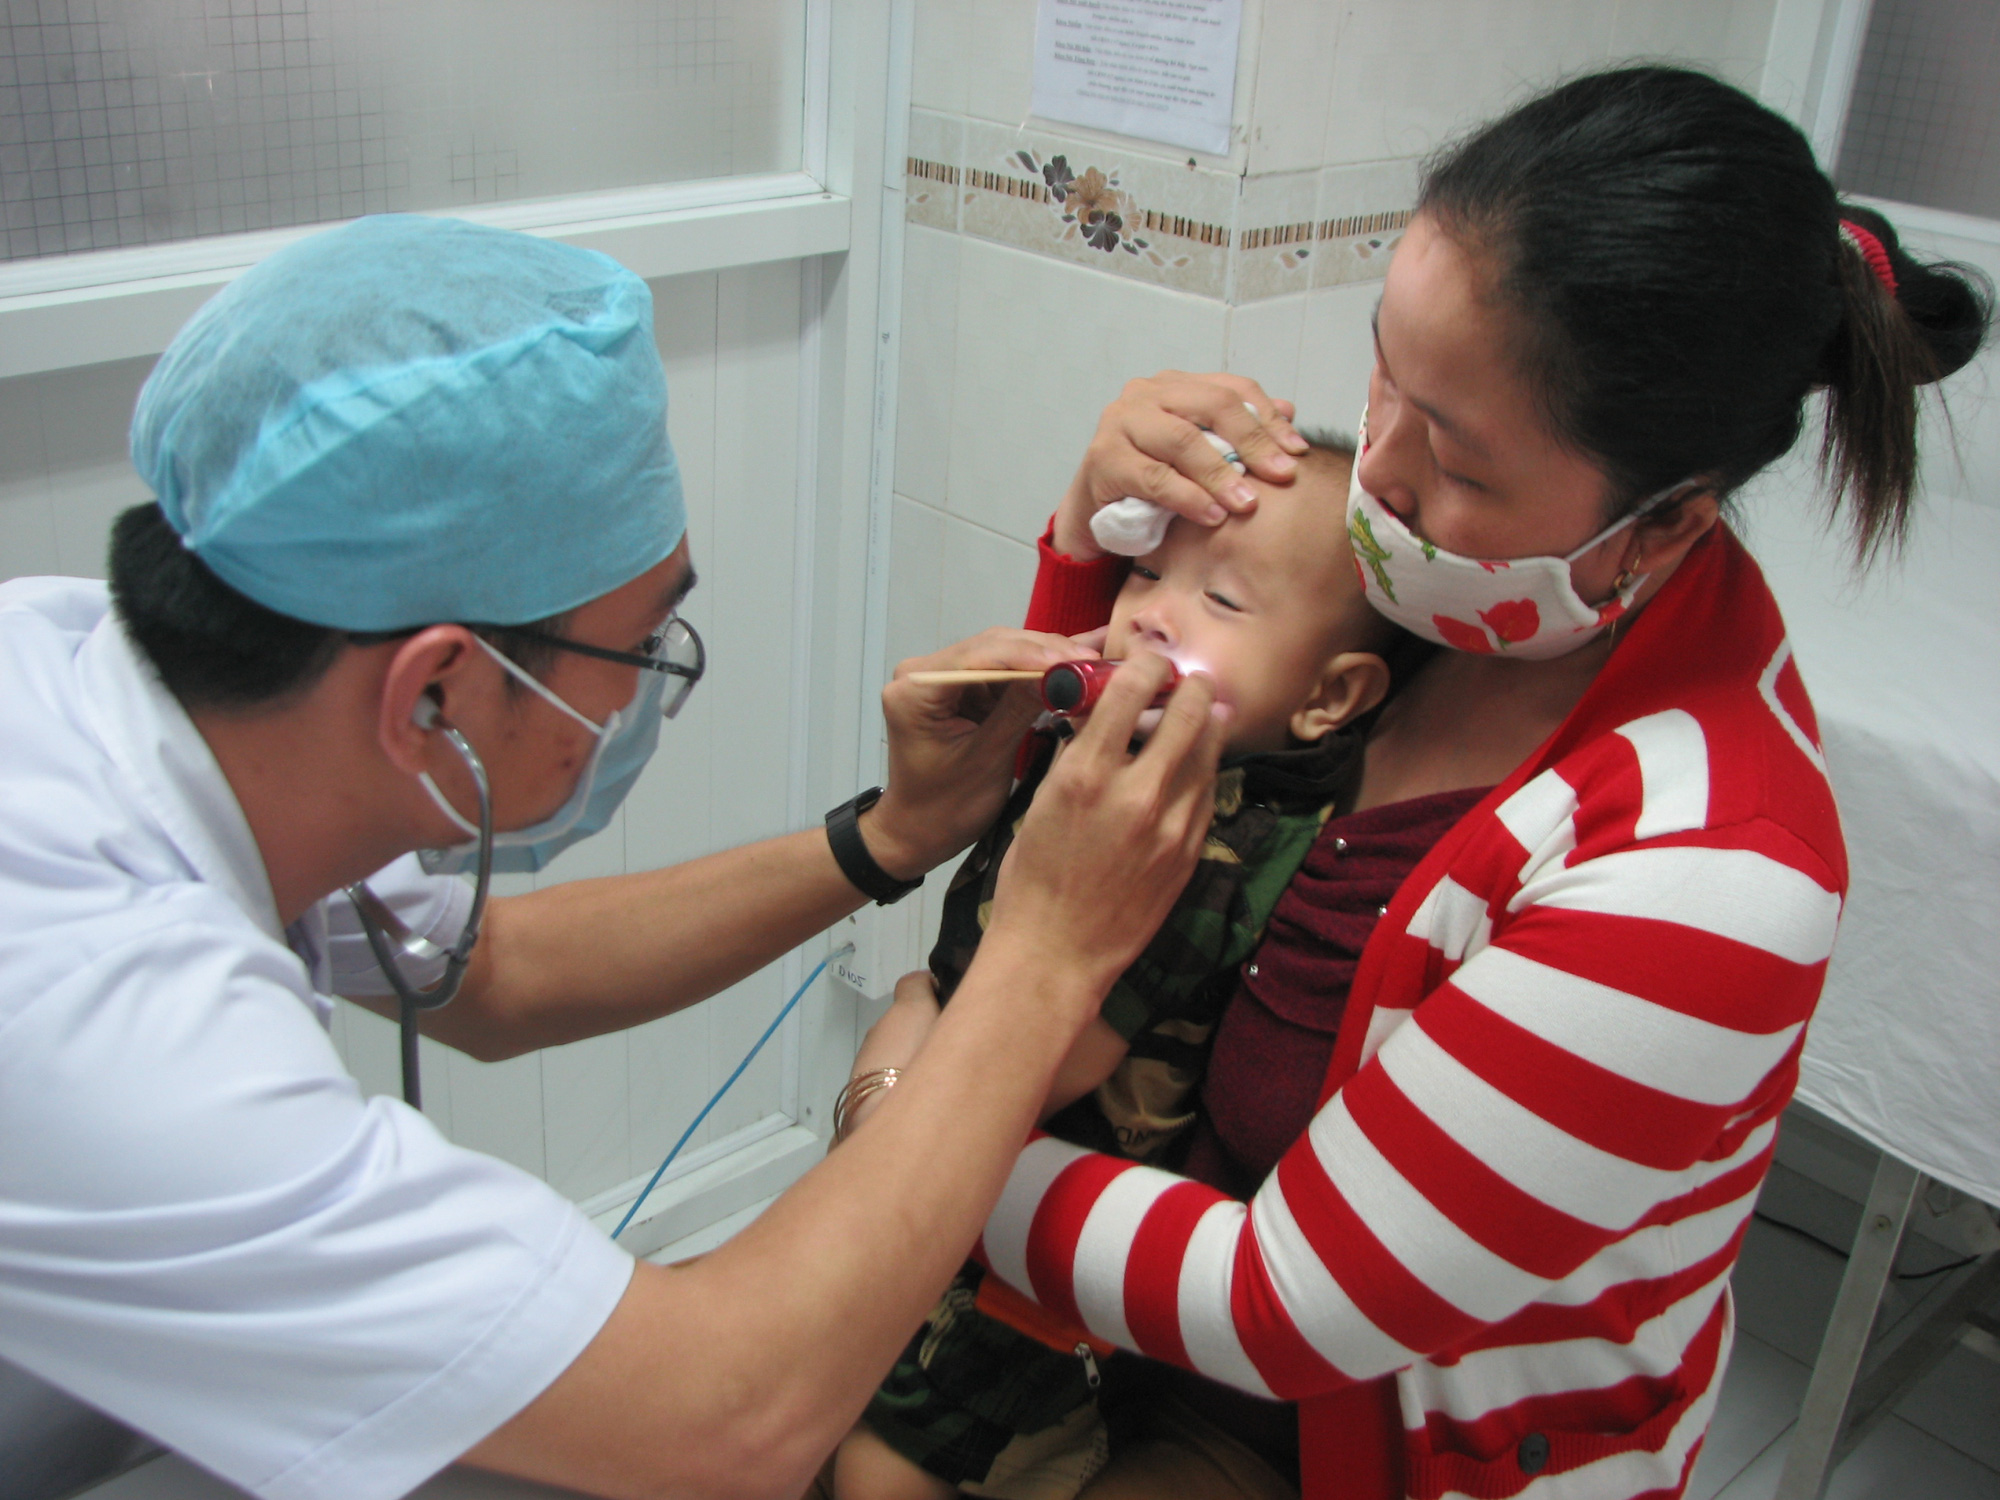 Parents warned as HFMD cases in Vietnam’s Mekong Delta region on the rise